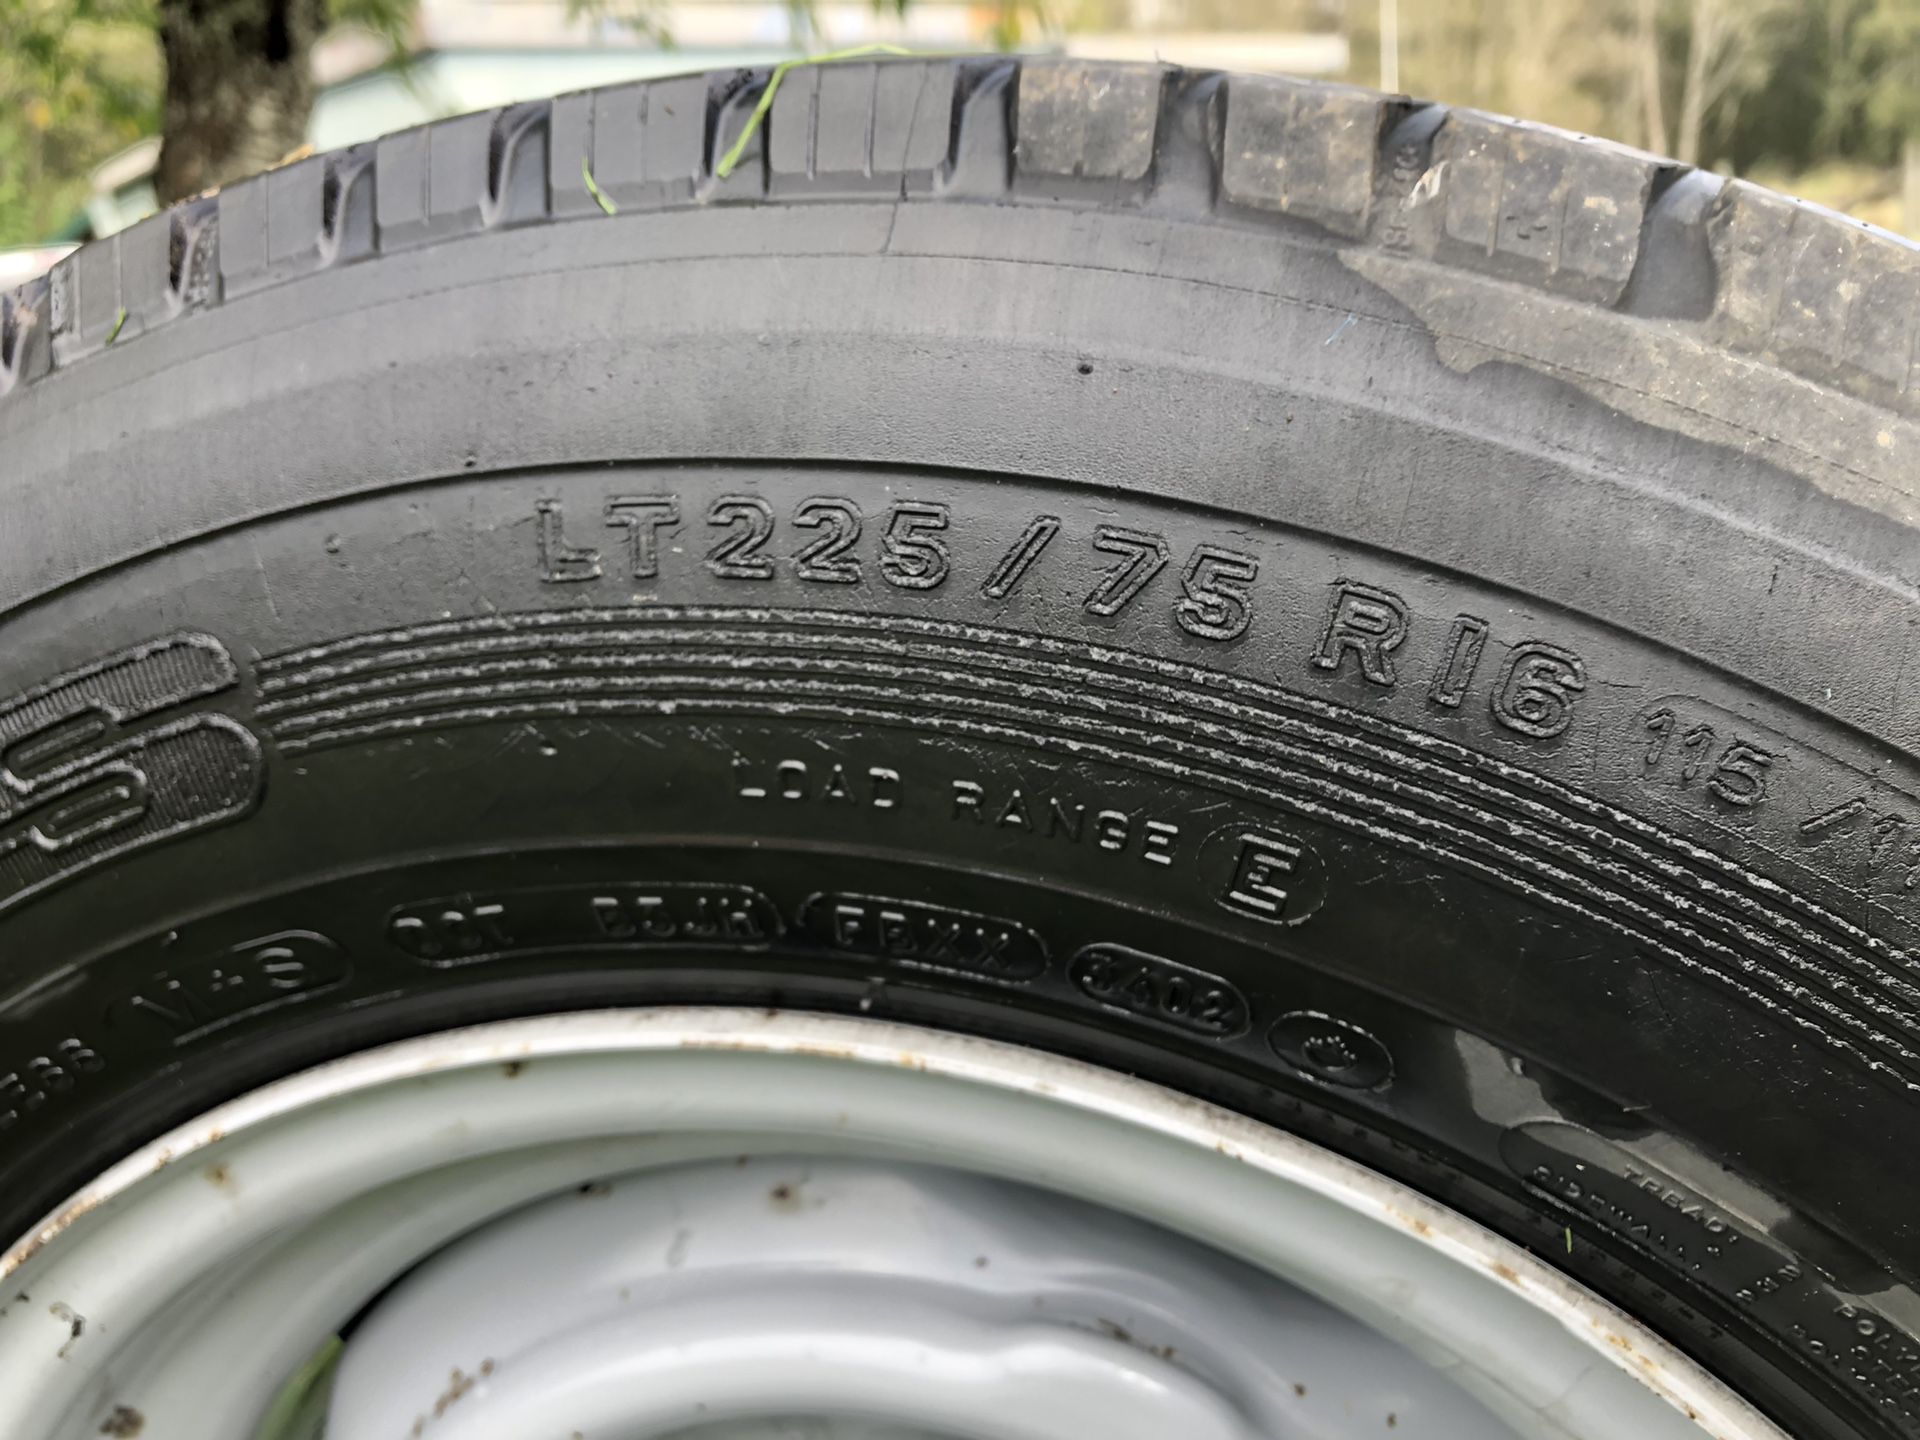 Two - 3/4 ton ford tires and rims. 265/75/16 plus other sizes and truck parts